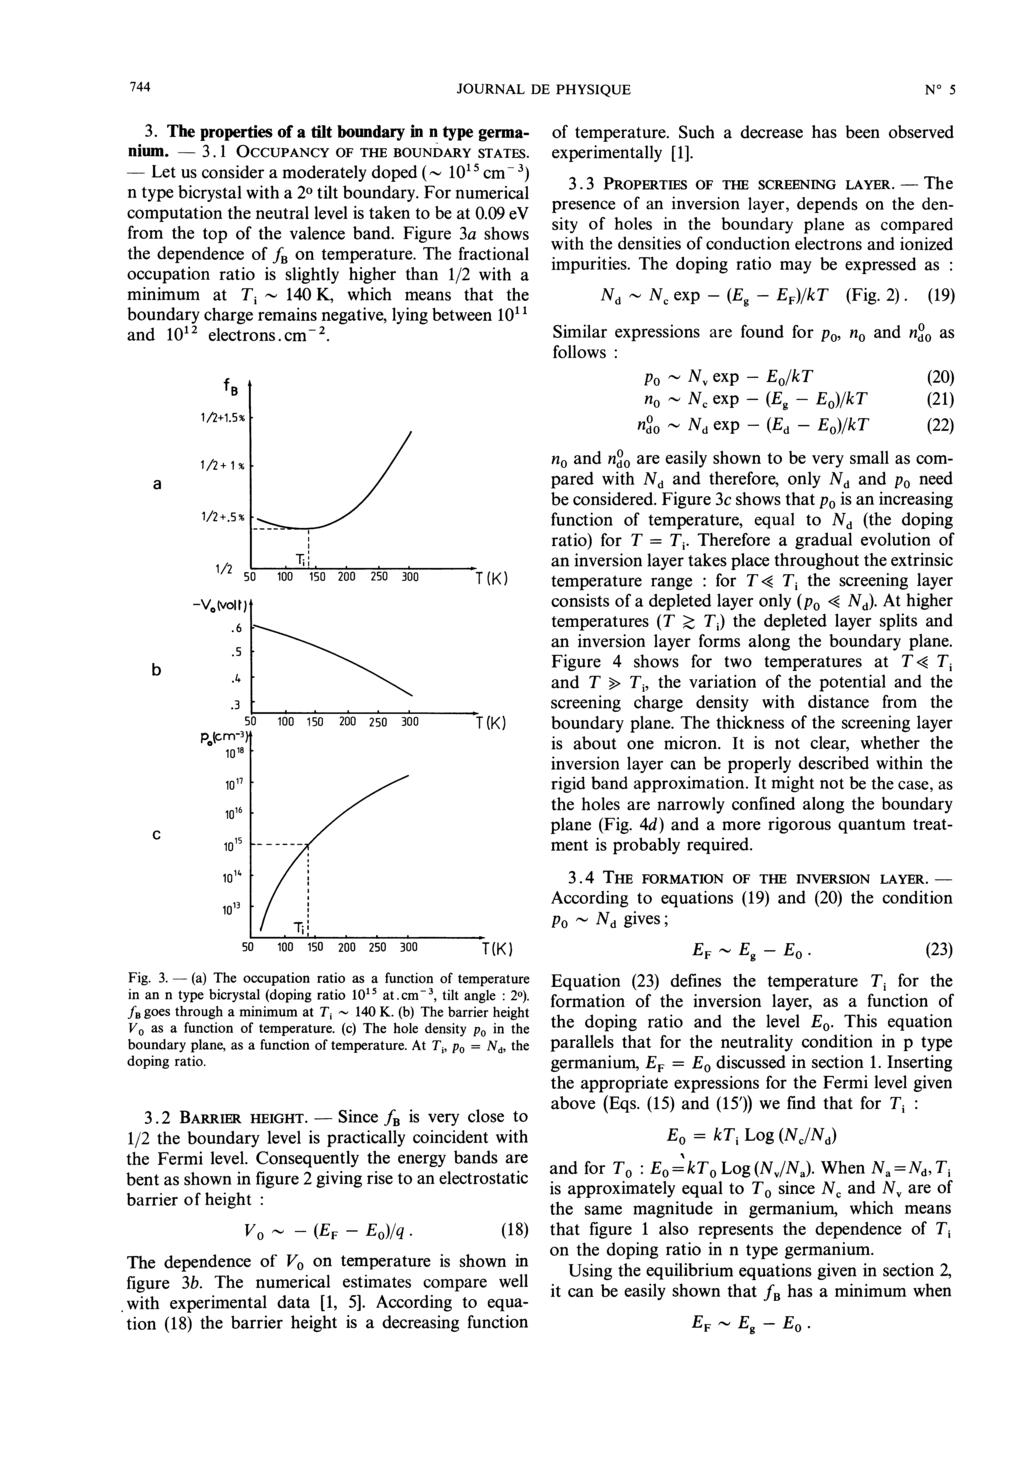 Let 3.1 (a) Since 744 3. The properties of a tilt boundary in n type germanium. OCCUPANCY OF THE BOUNDARY STATES. us consider a moderately doped ( 1015 cm 3) n type bicrystal with a 20 tilt boundary.